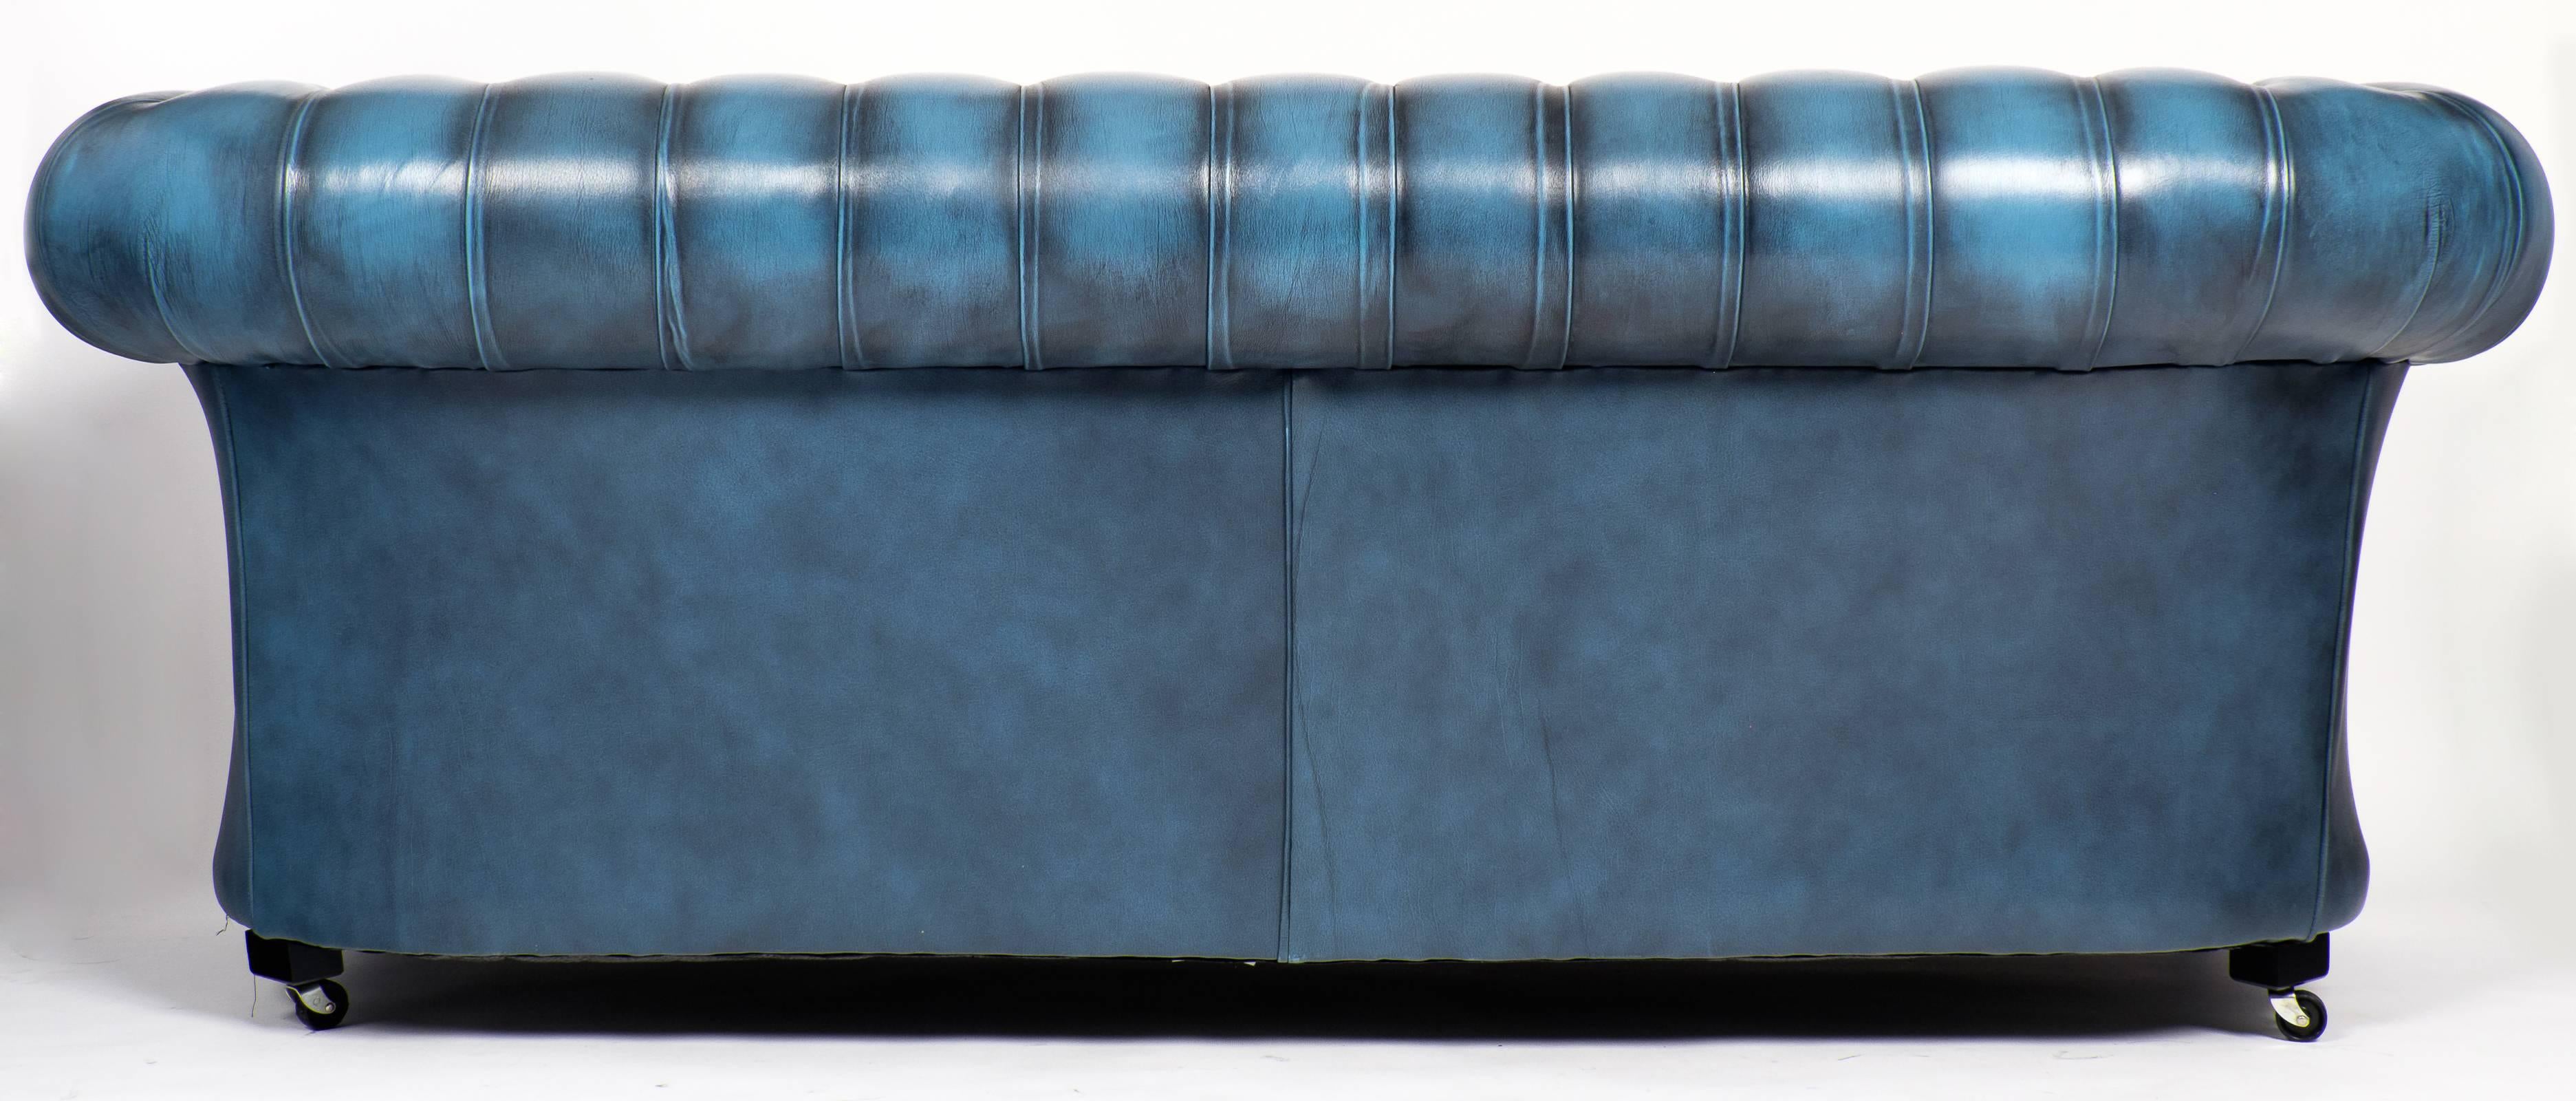 Vintage Steel Blue Leather Chesterfield Sofa 1